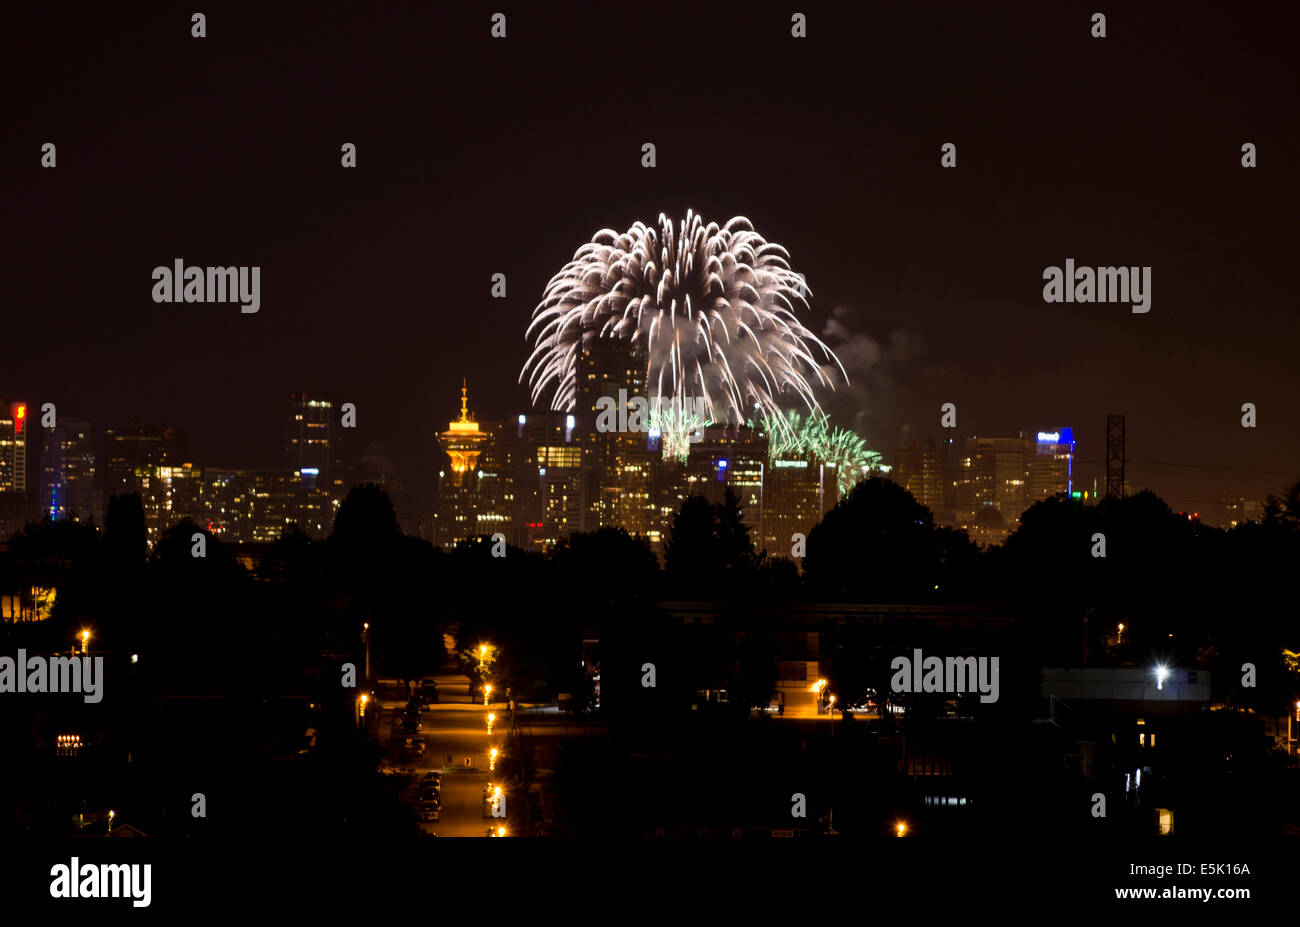 VANCOUVER, BC, CANADA. AUGUST 2, 2014: Downtown Vancouver is illuminated by the fireworks sent off from English Bay during the Honda Celebration of Light fireworks competition.  It was Japan's turn to present their entry into the annual competition which attracted thousands of spectators Credit: Maria Janicki/Alamy Live News. Stock Photo